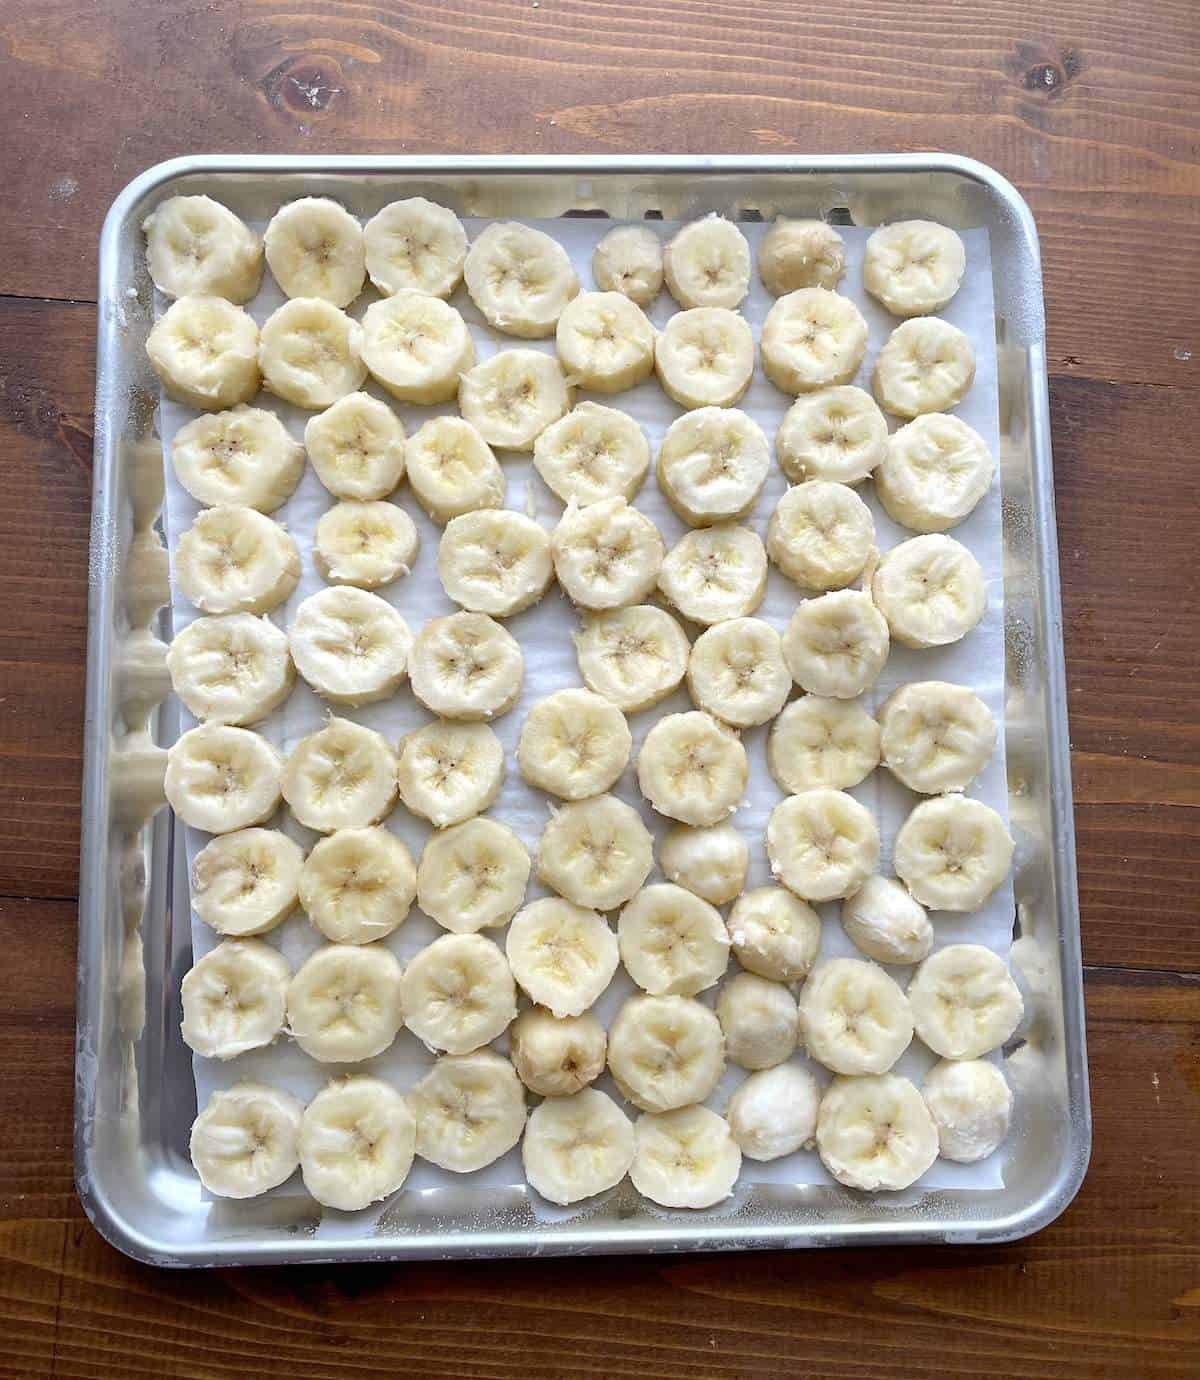 Bananas slices frozen in a single layer on a parchment paper lined baking sheet.